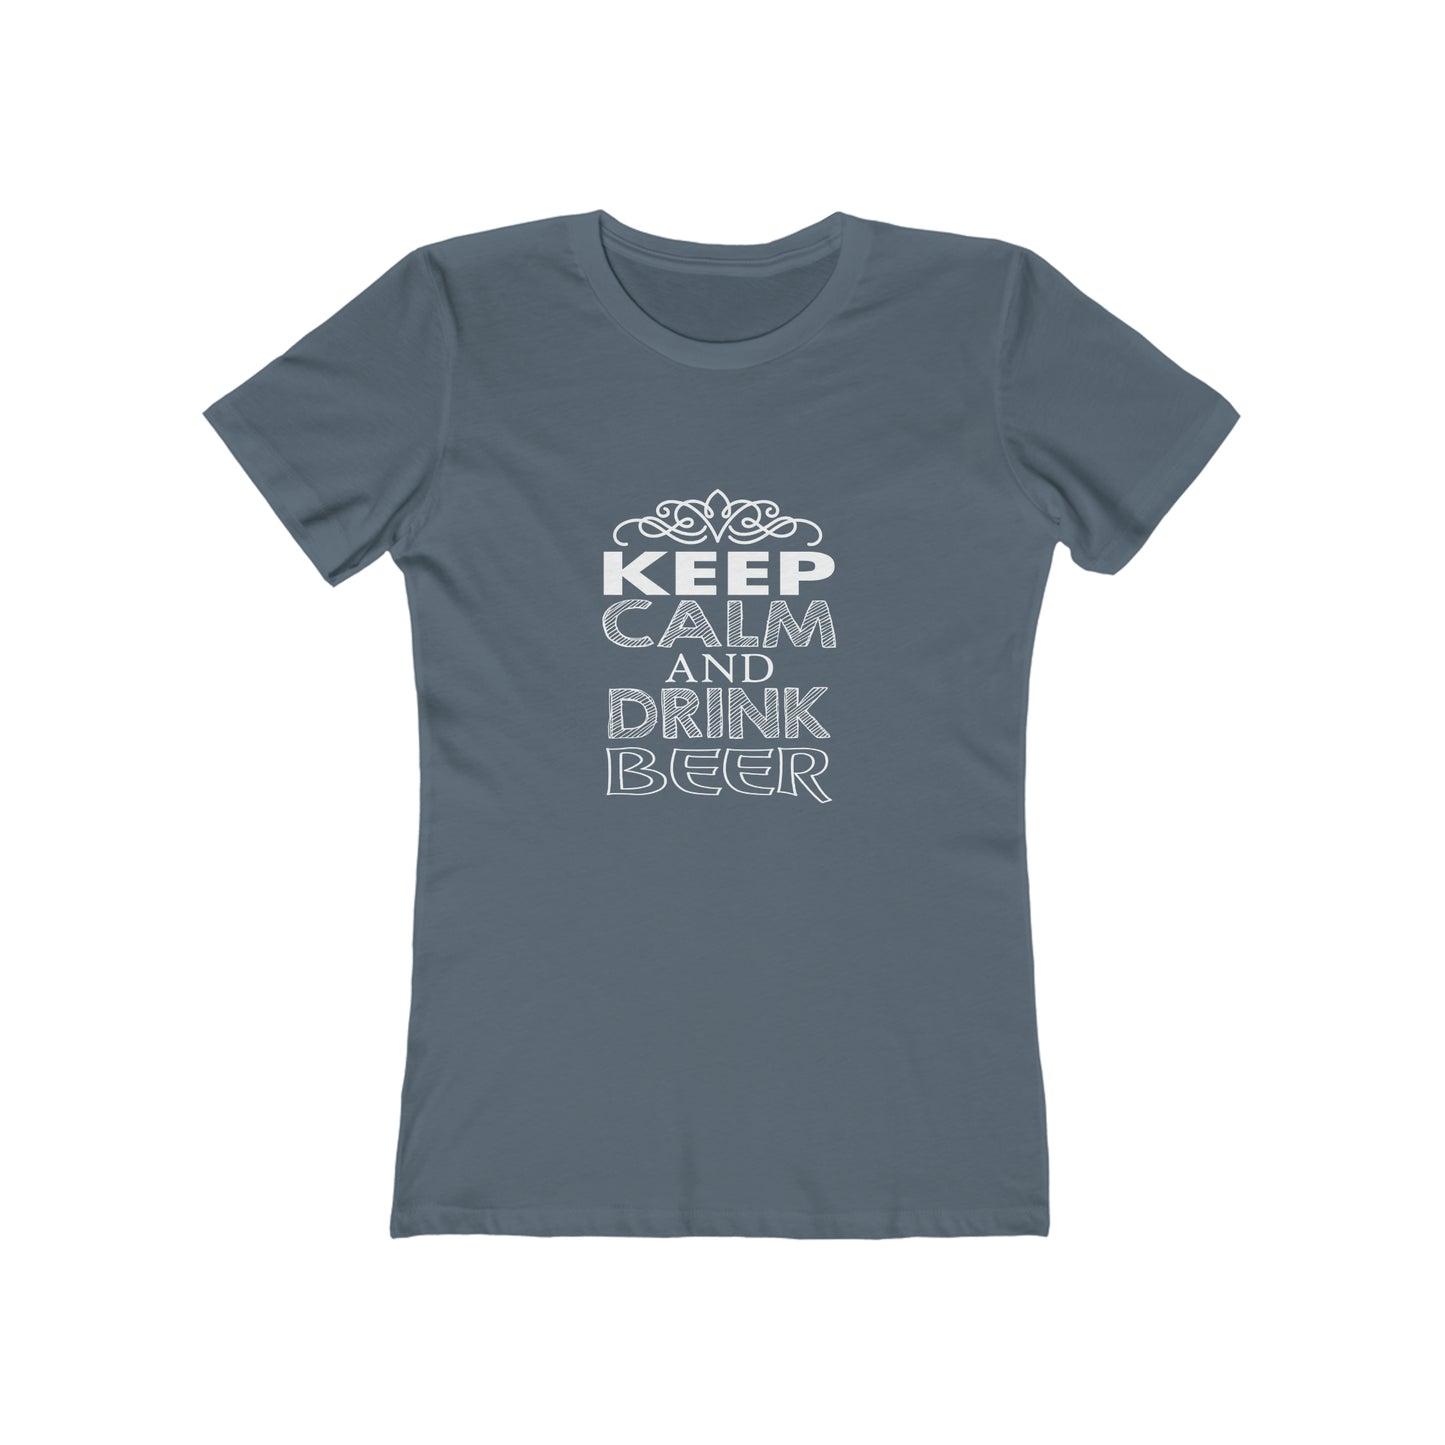 Keep Calm and Drink Beer - Women's T-shirt